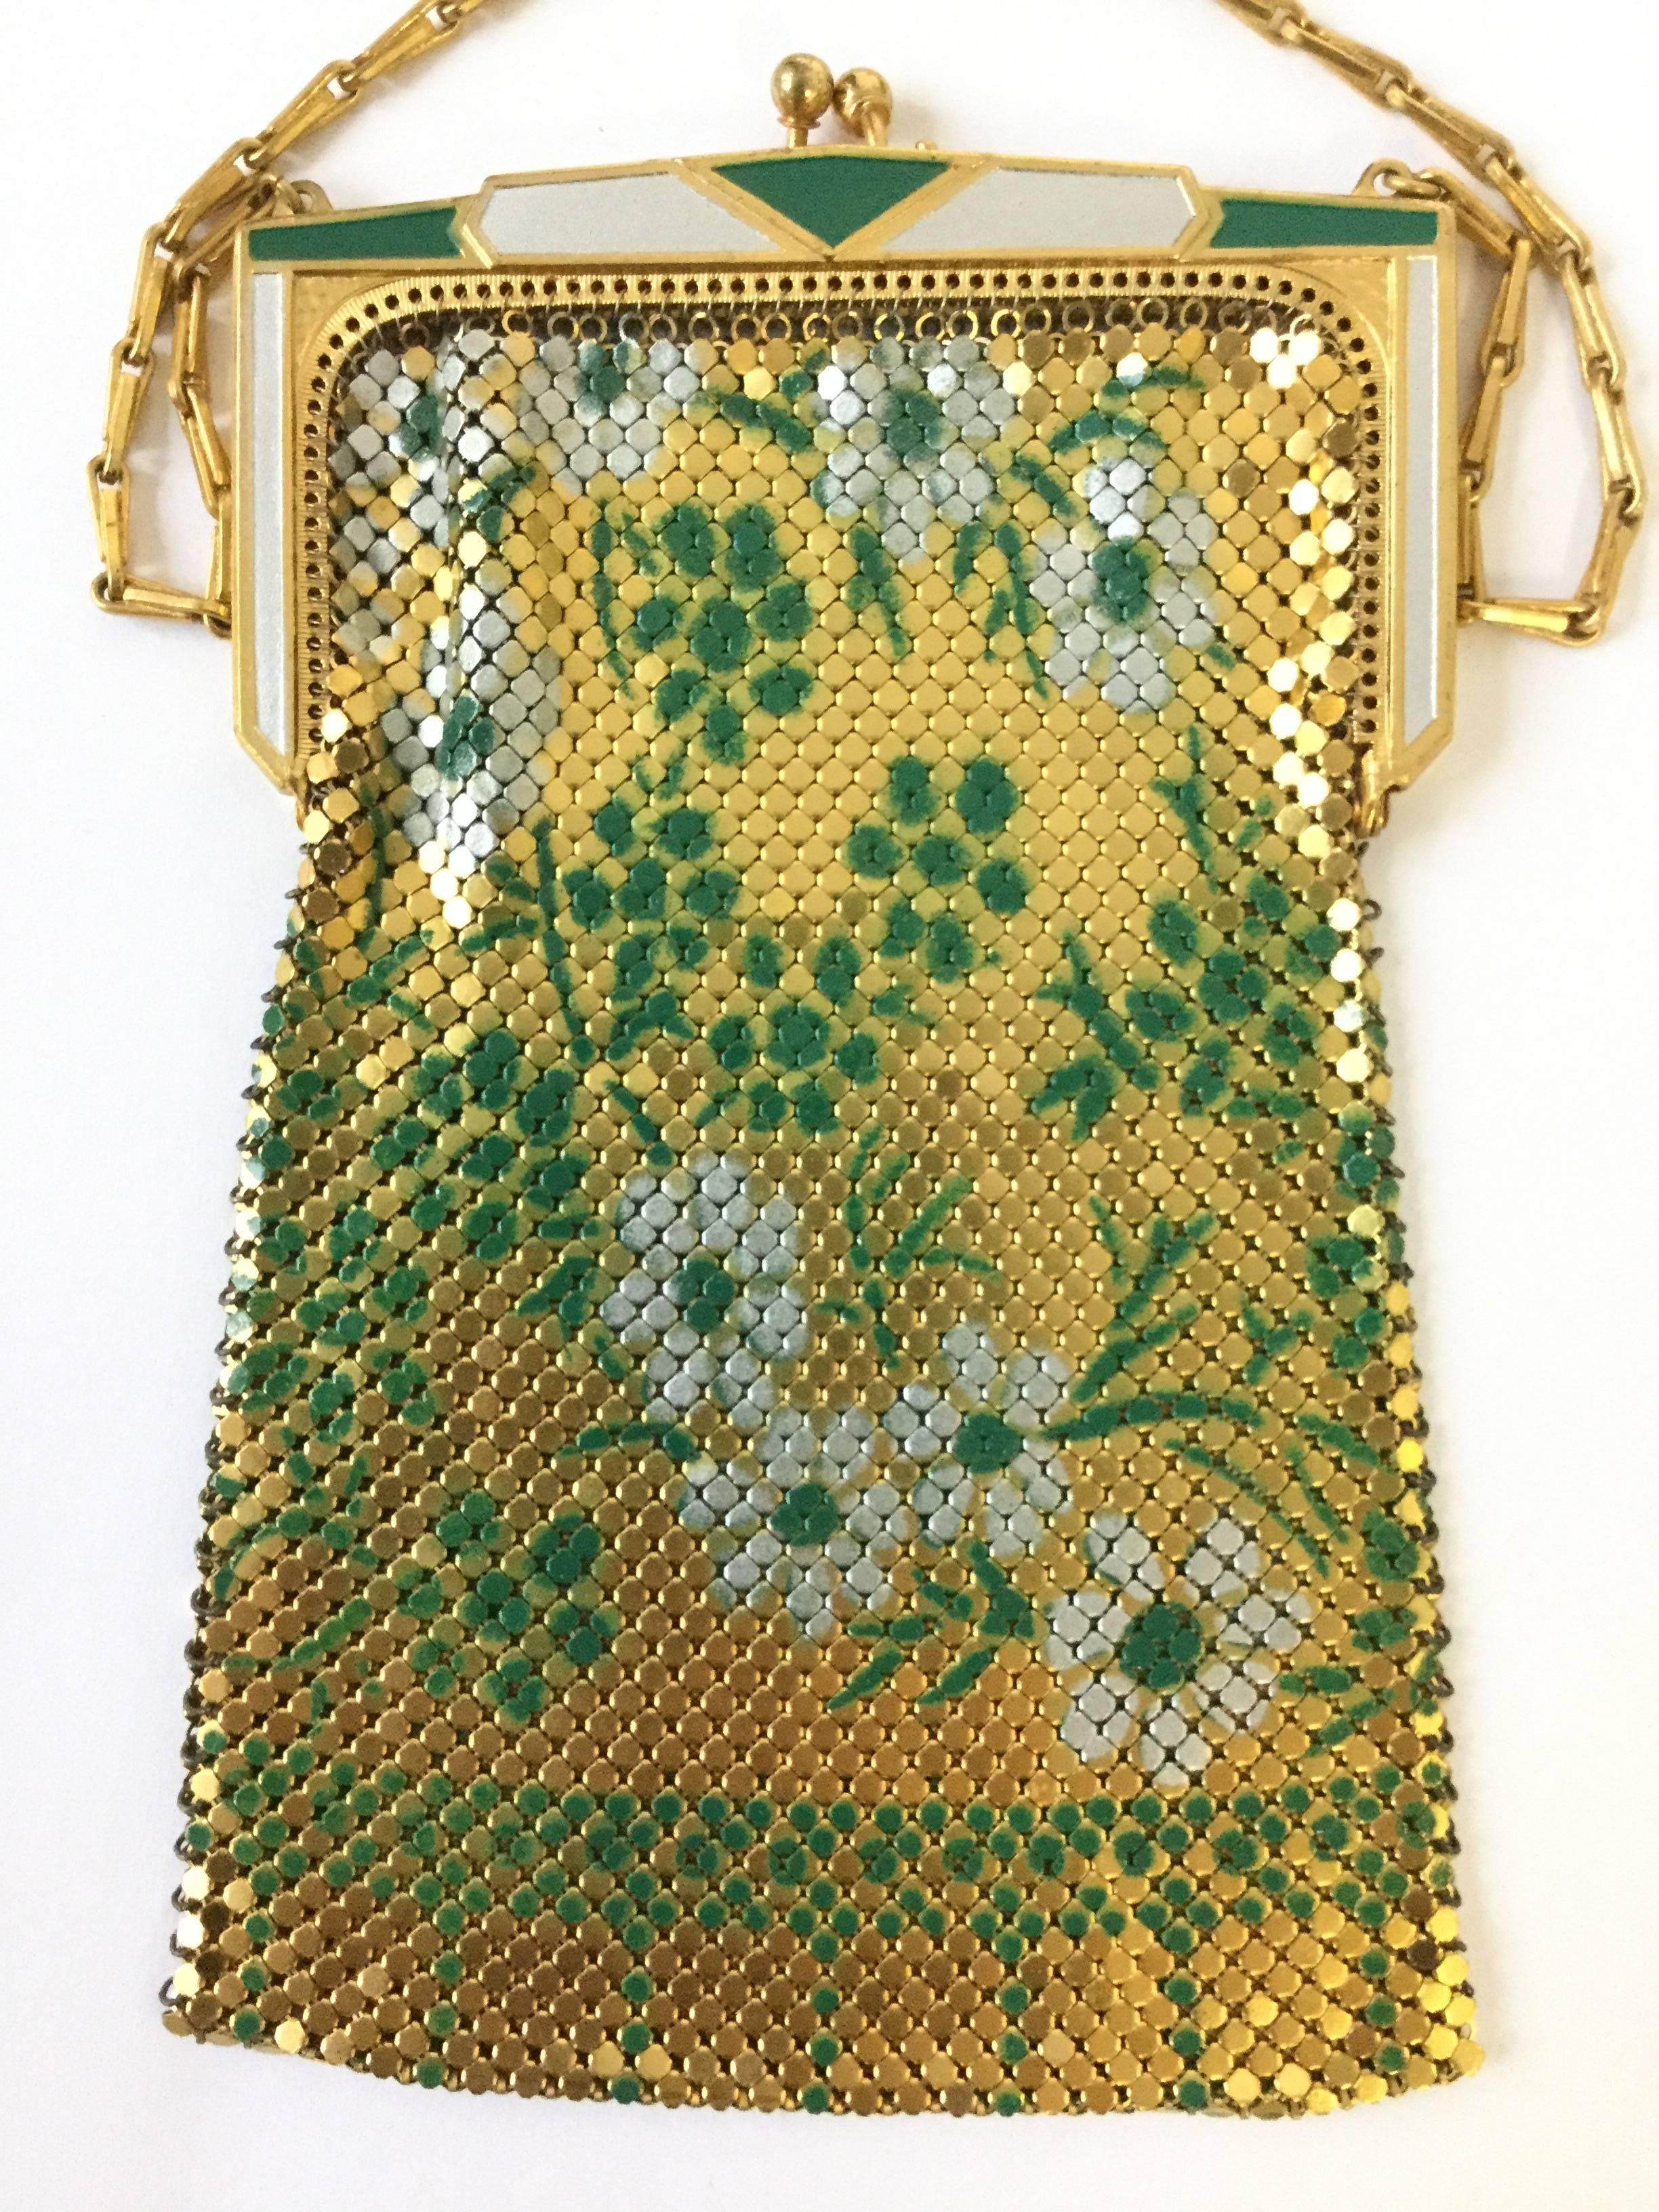 
Glitzy and glamorous 1920s Whiting and Davis evening purse! This gorgeous enamel mesh purse features an art deco clasp painted in alternating white and green. The mesh body of the purse has a floral design consisting of sprigs of white and green